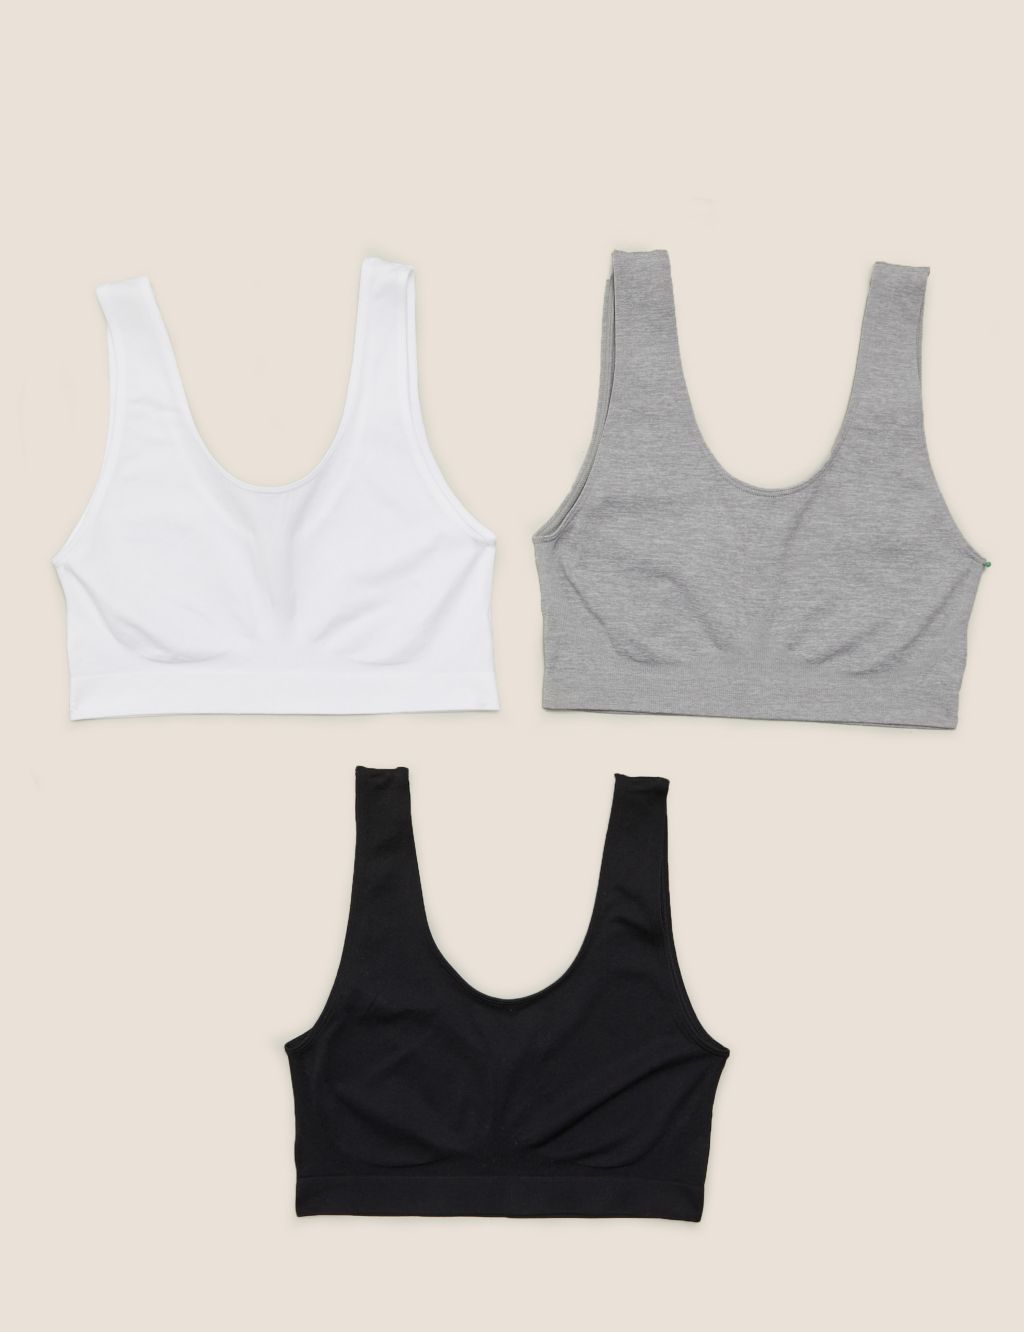 Bargain catcher - AD M&S COLLECTION 3pk Seamless Non Wired Crop Tops Was  £18 Now £12.60